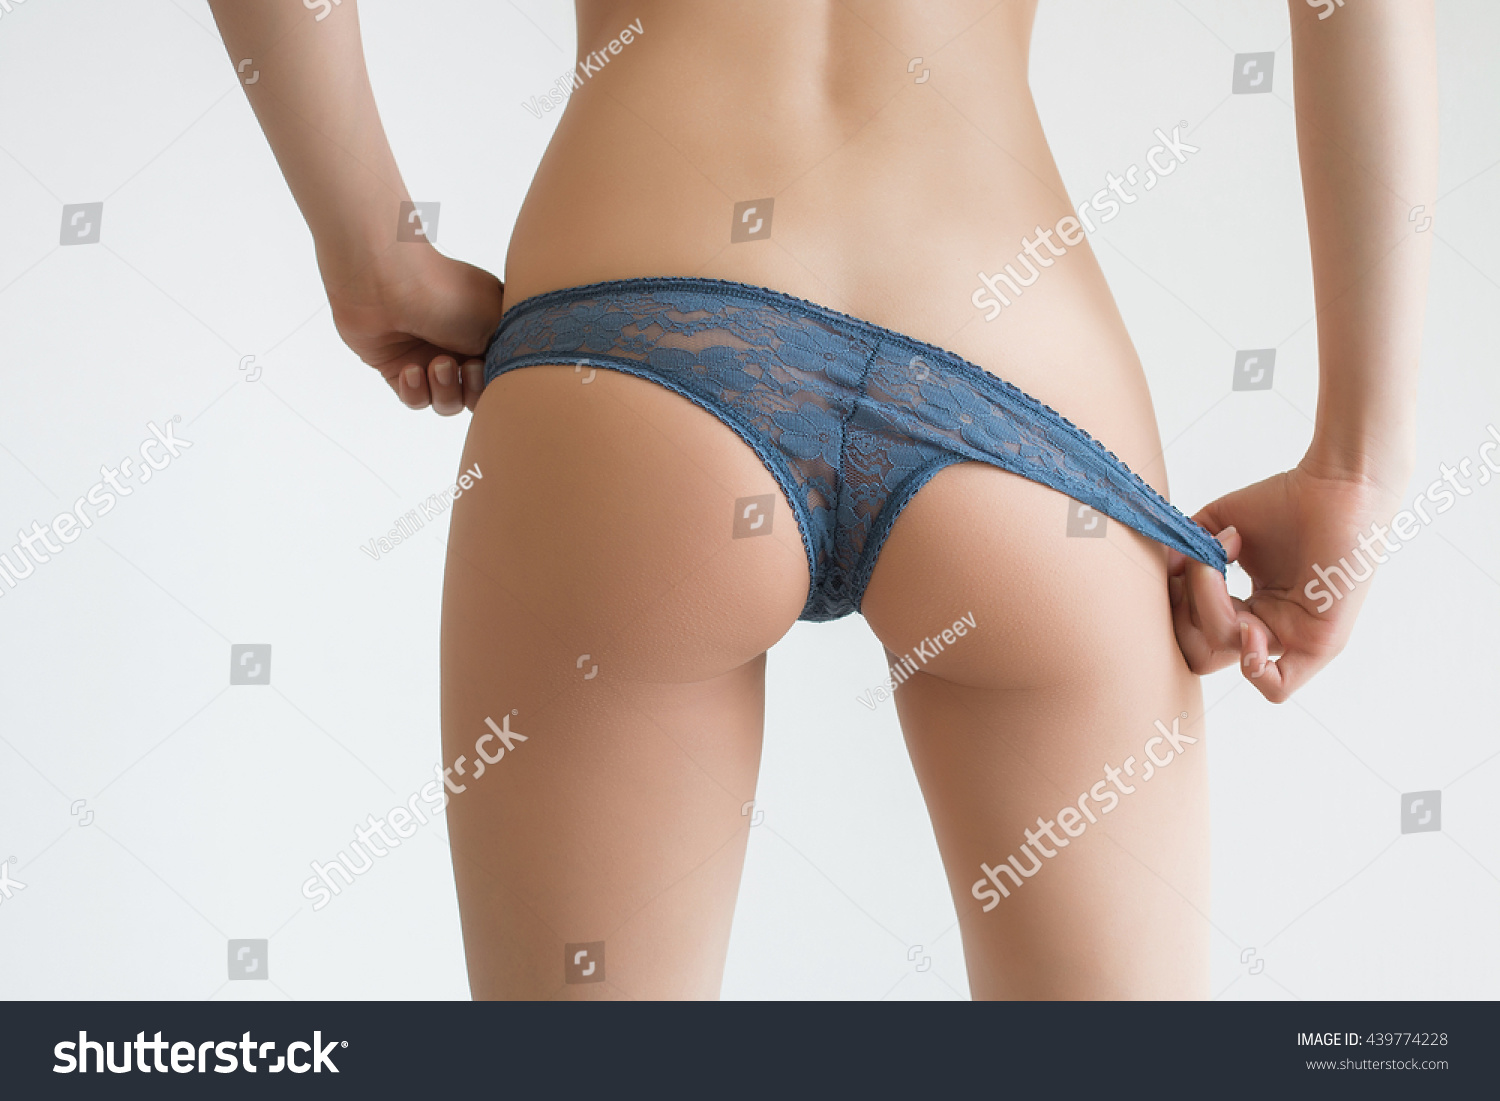 Girl Butt Pictures